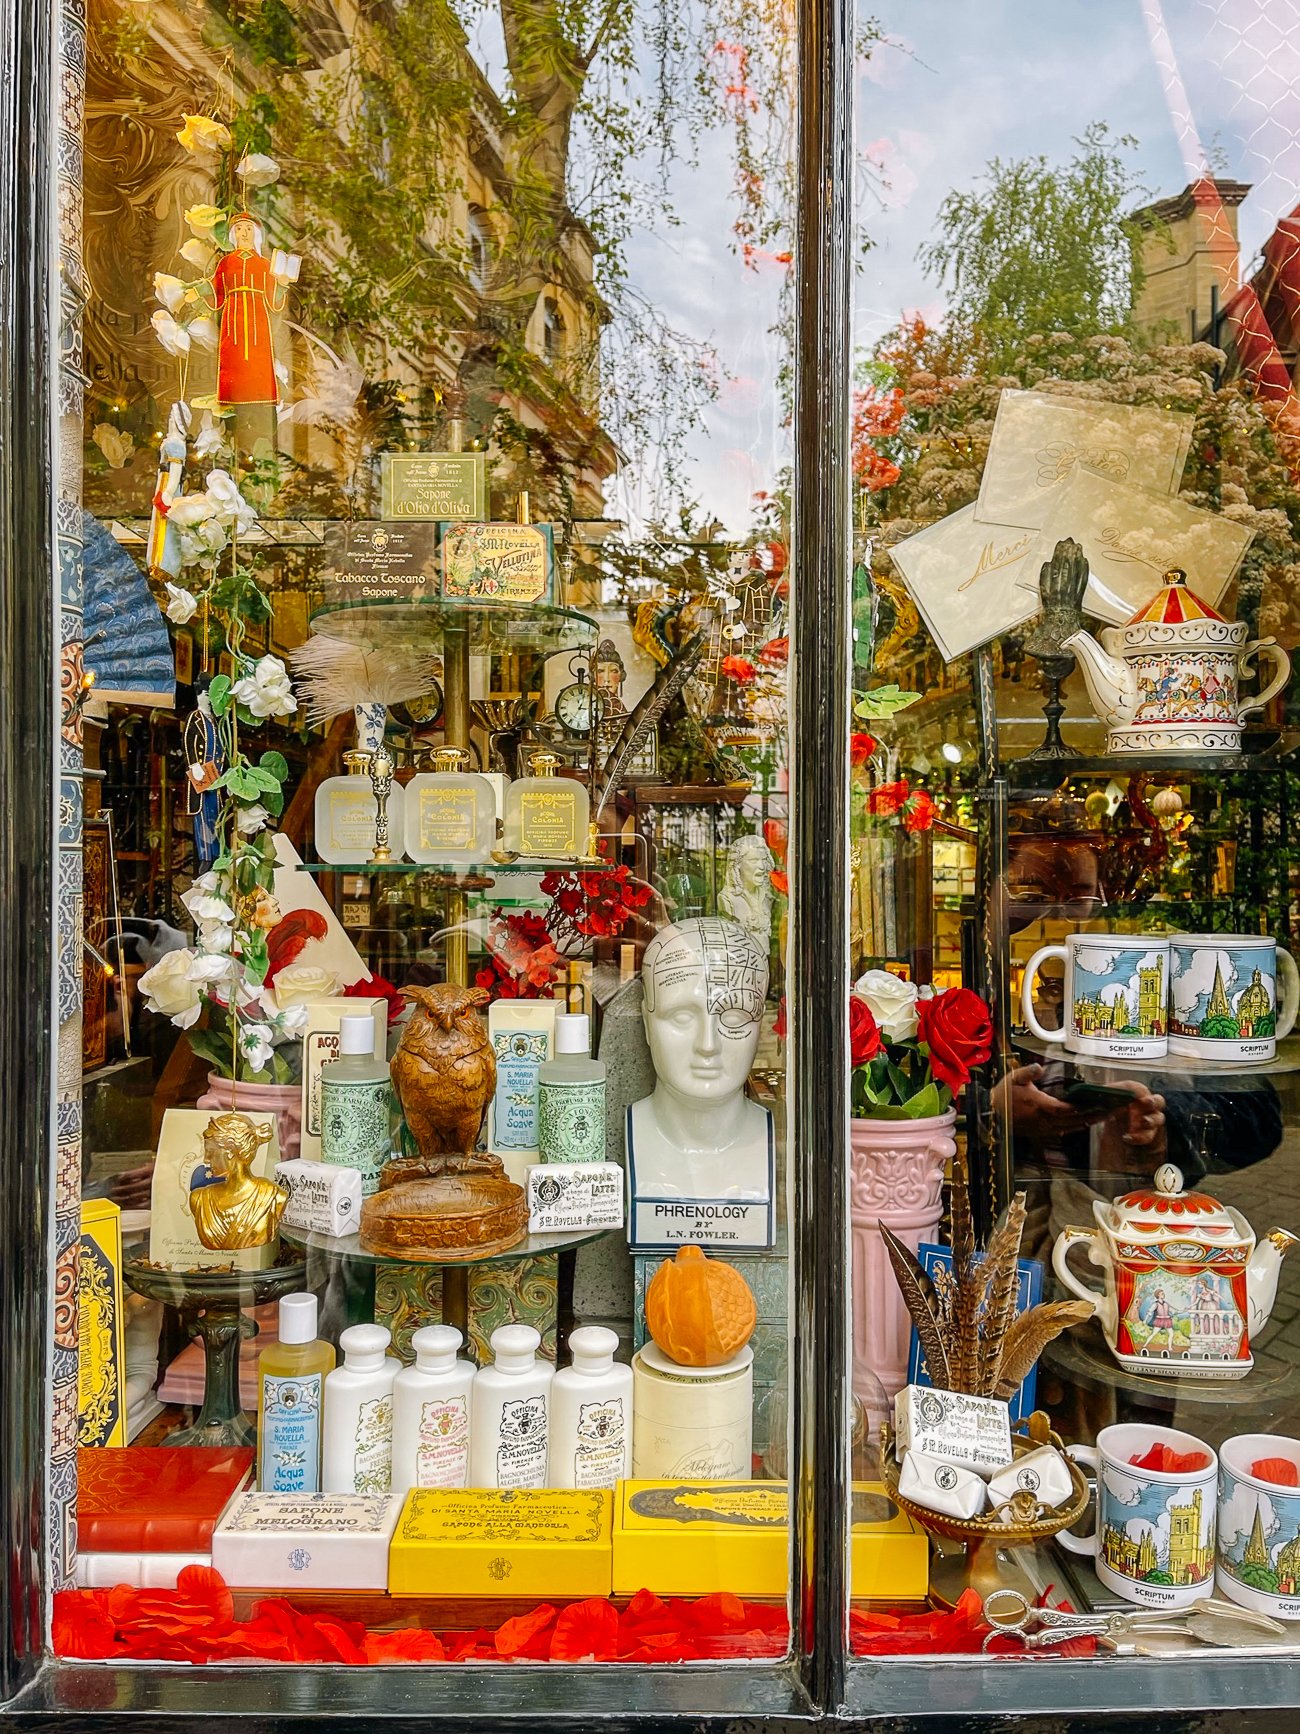 Oxford shop window with soaps, perfumes, and old world gifts